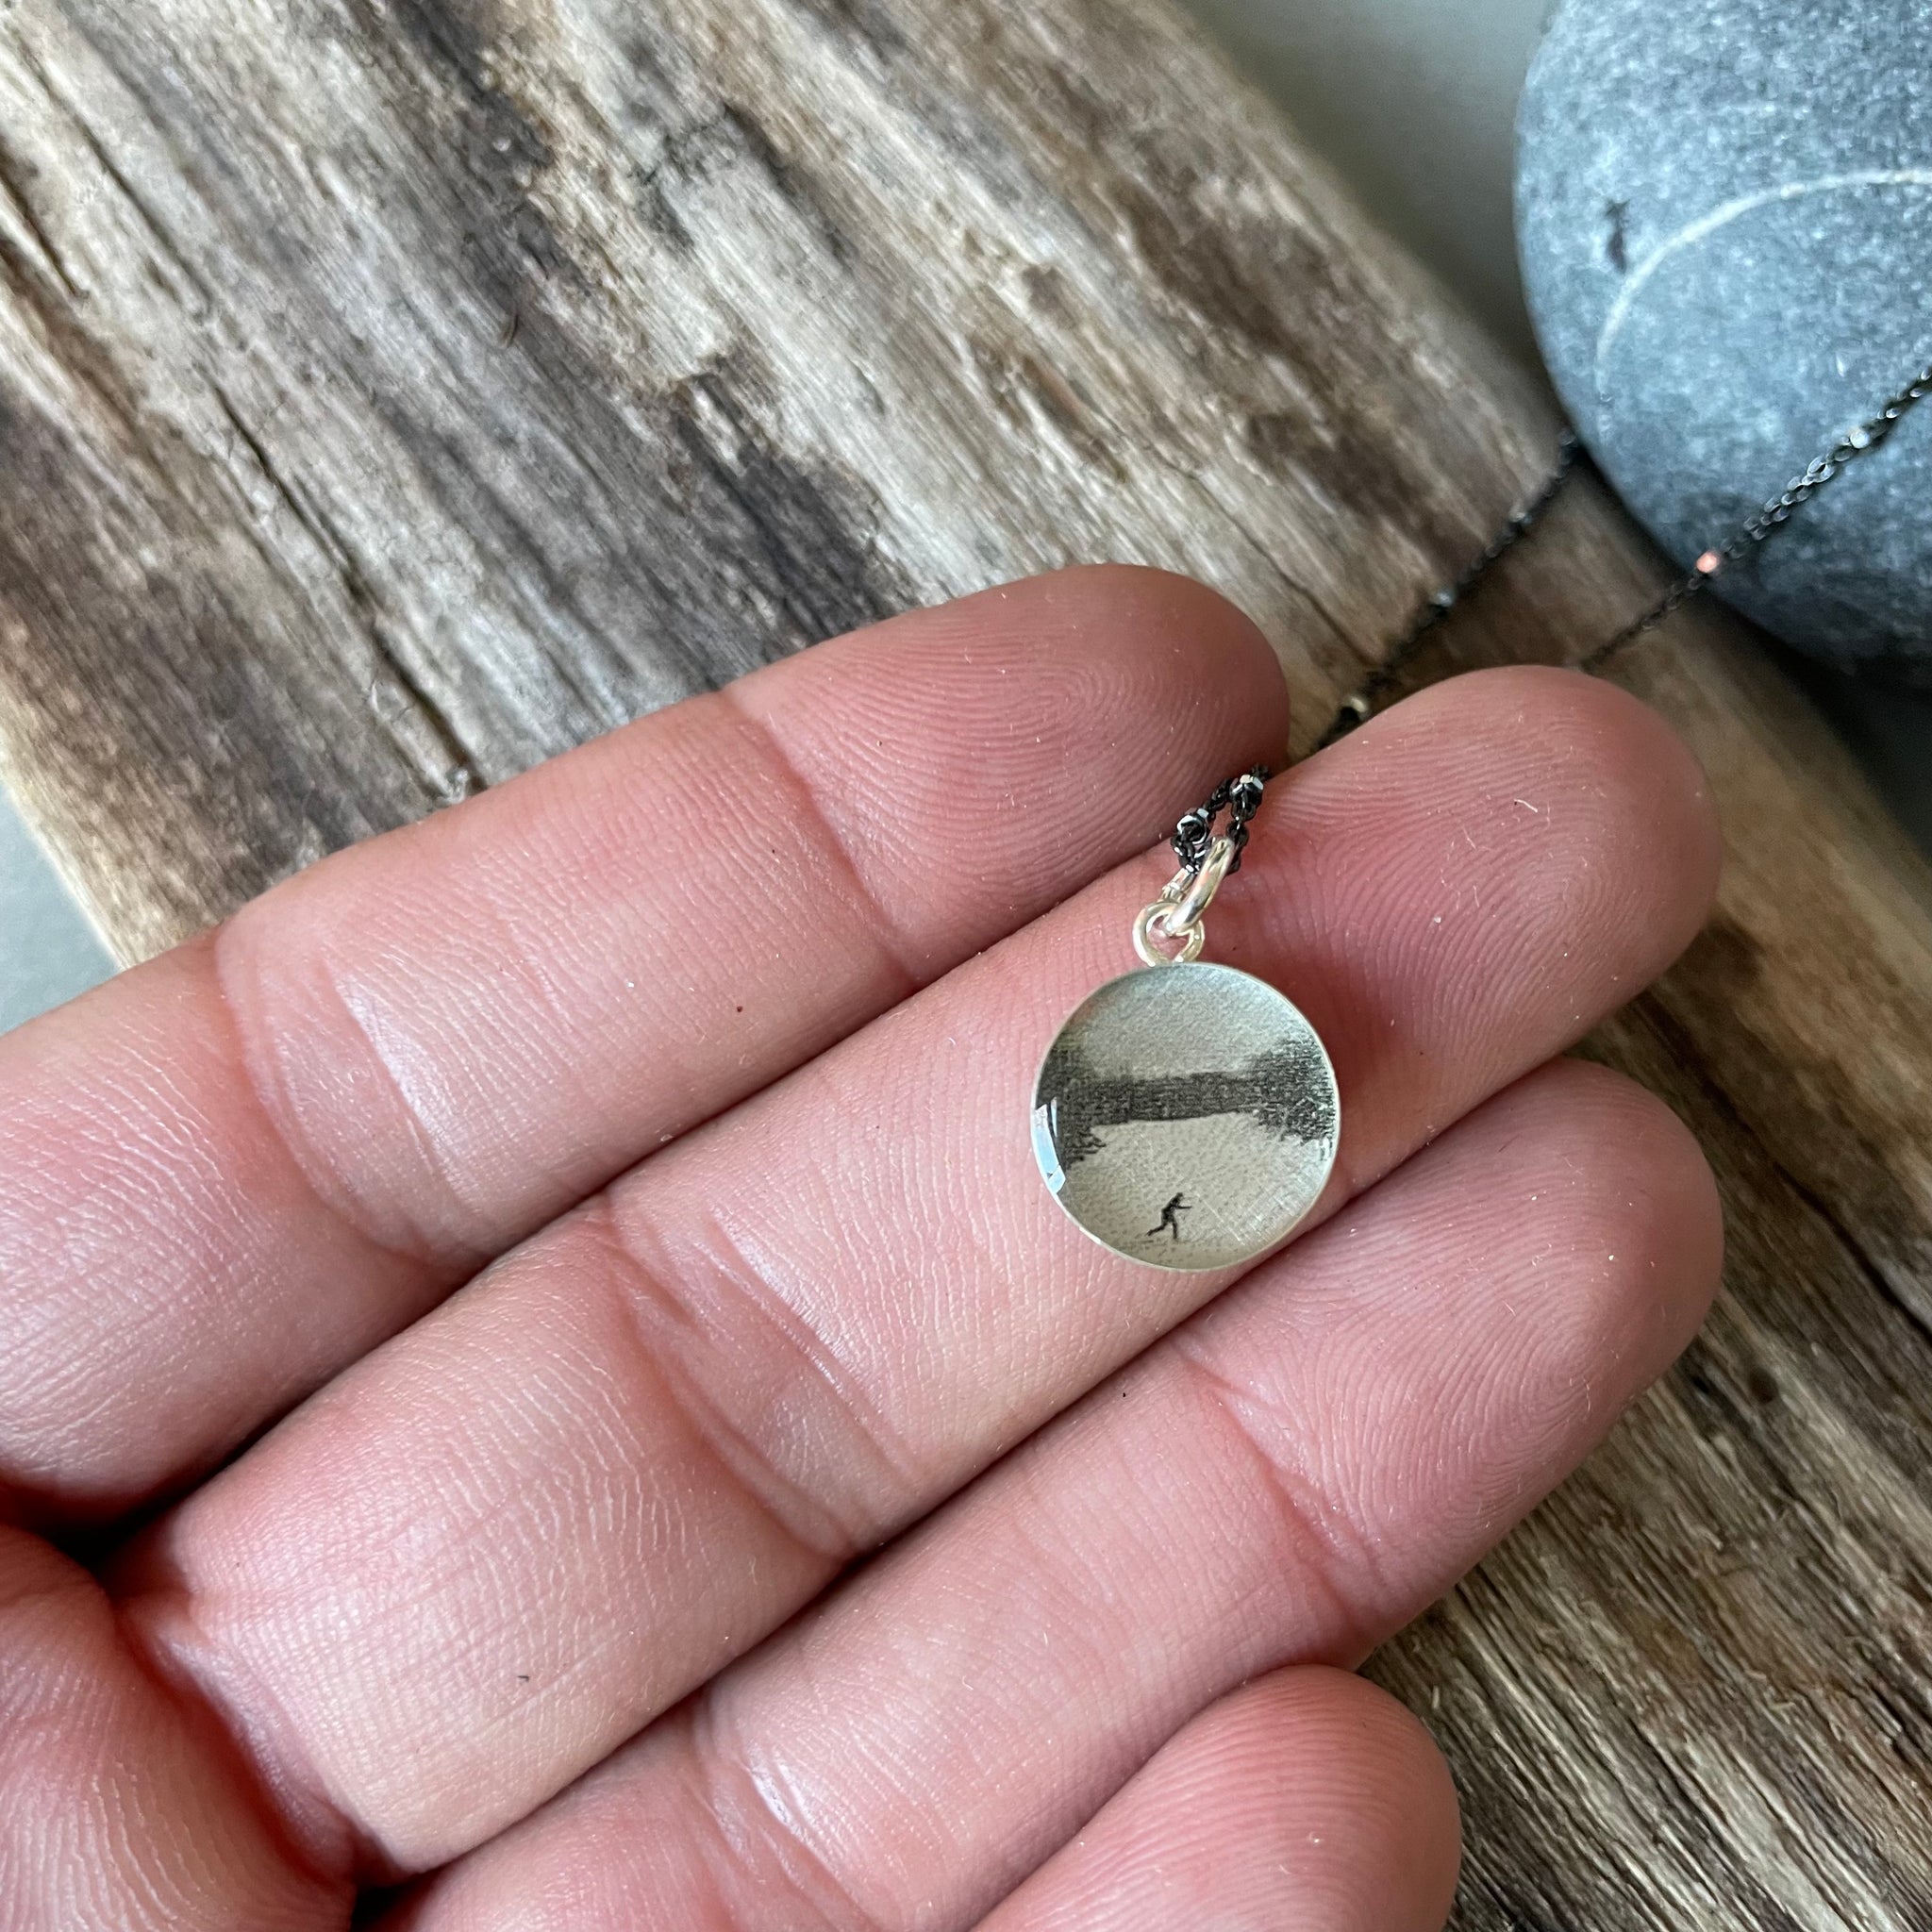 Cross Country Skier Photo Bezel Necklace on Sterling by Everyday Artifact